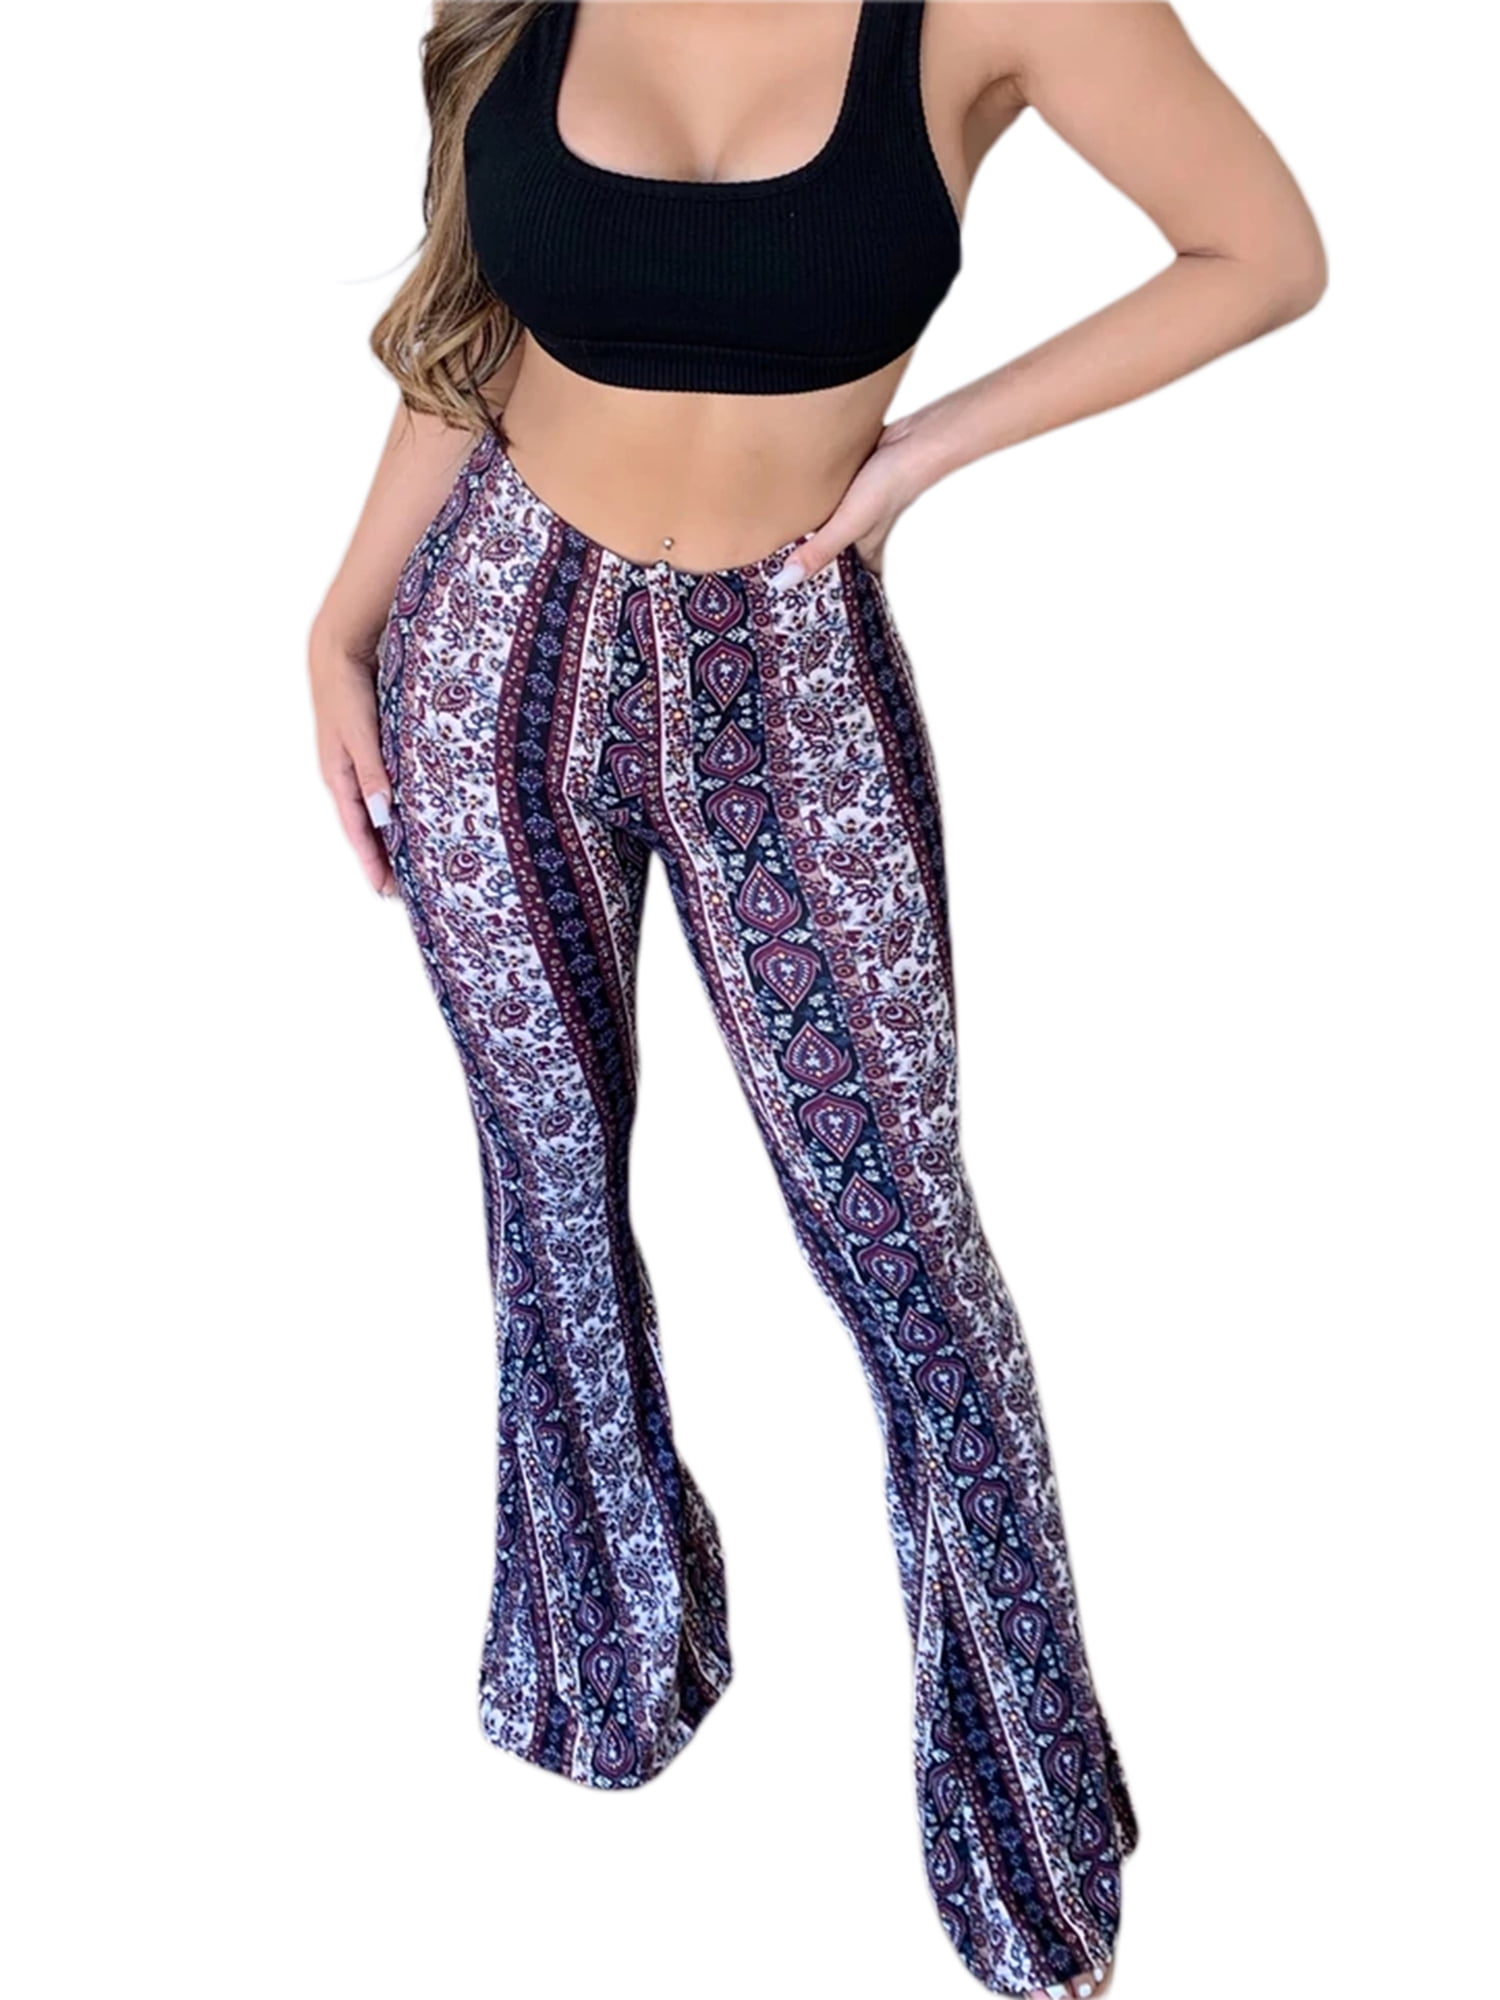 brilliantme Women Leggings High Waist Flare Pants Slim Fitming Fit Casual  Straight Retro Floral Print Comfy Yoga Trousers 